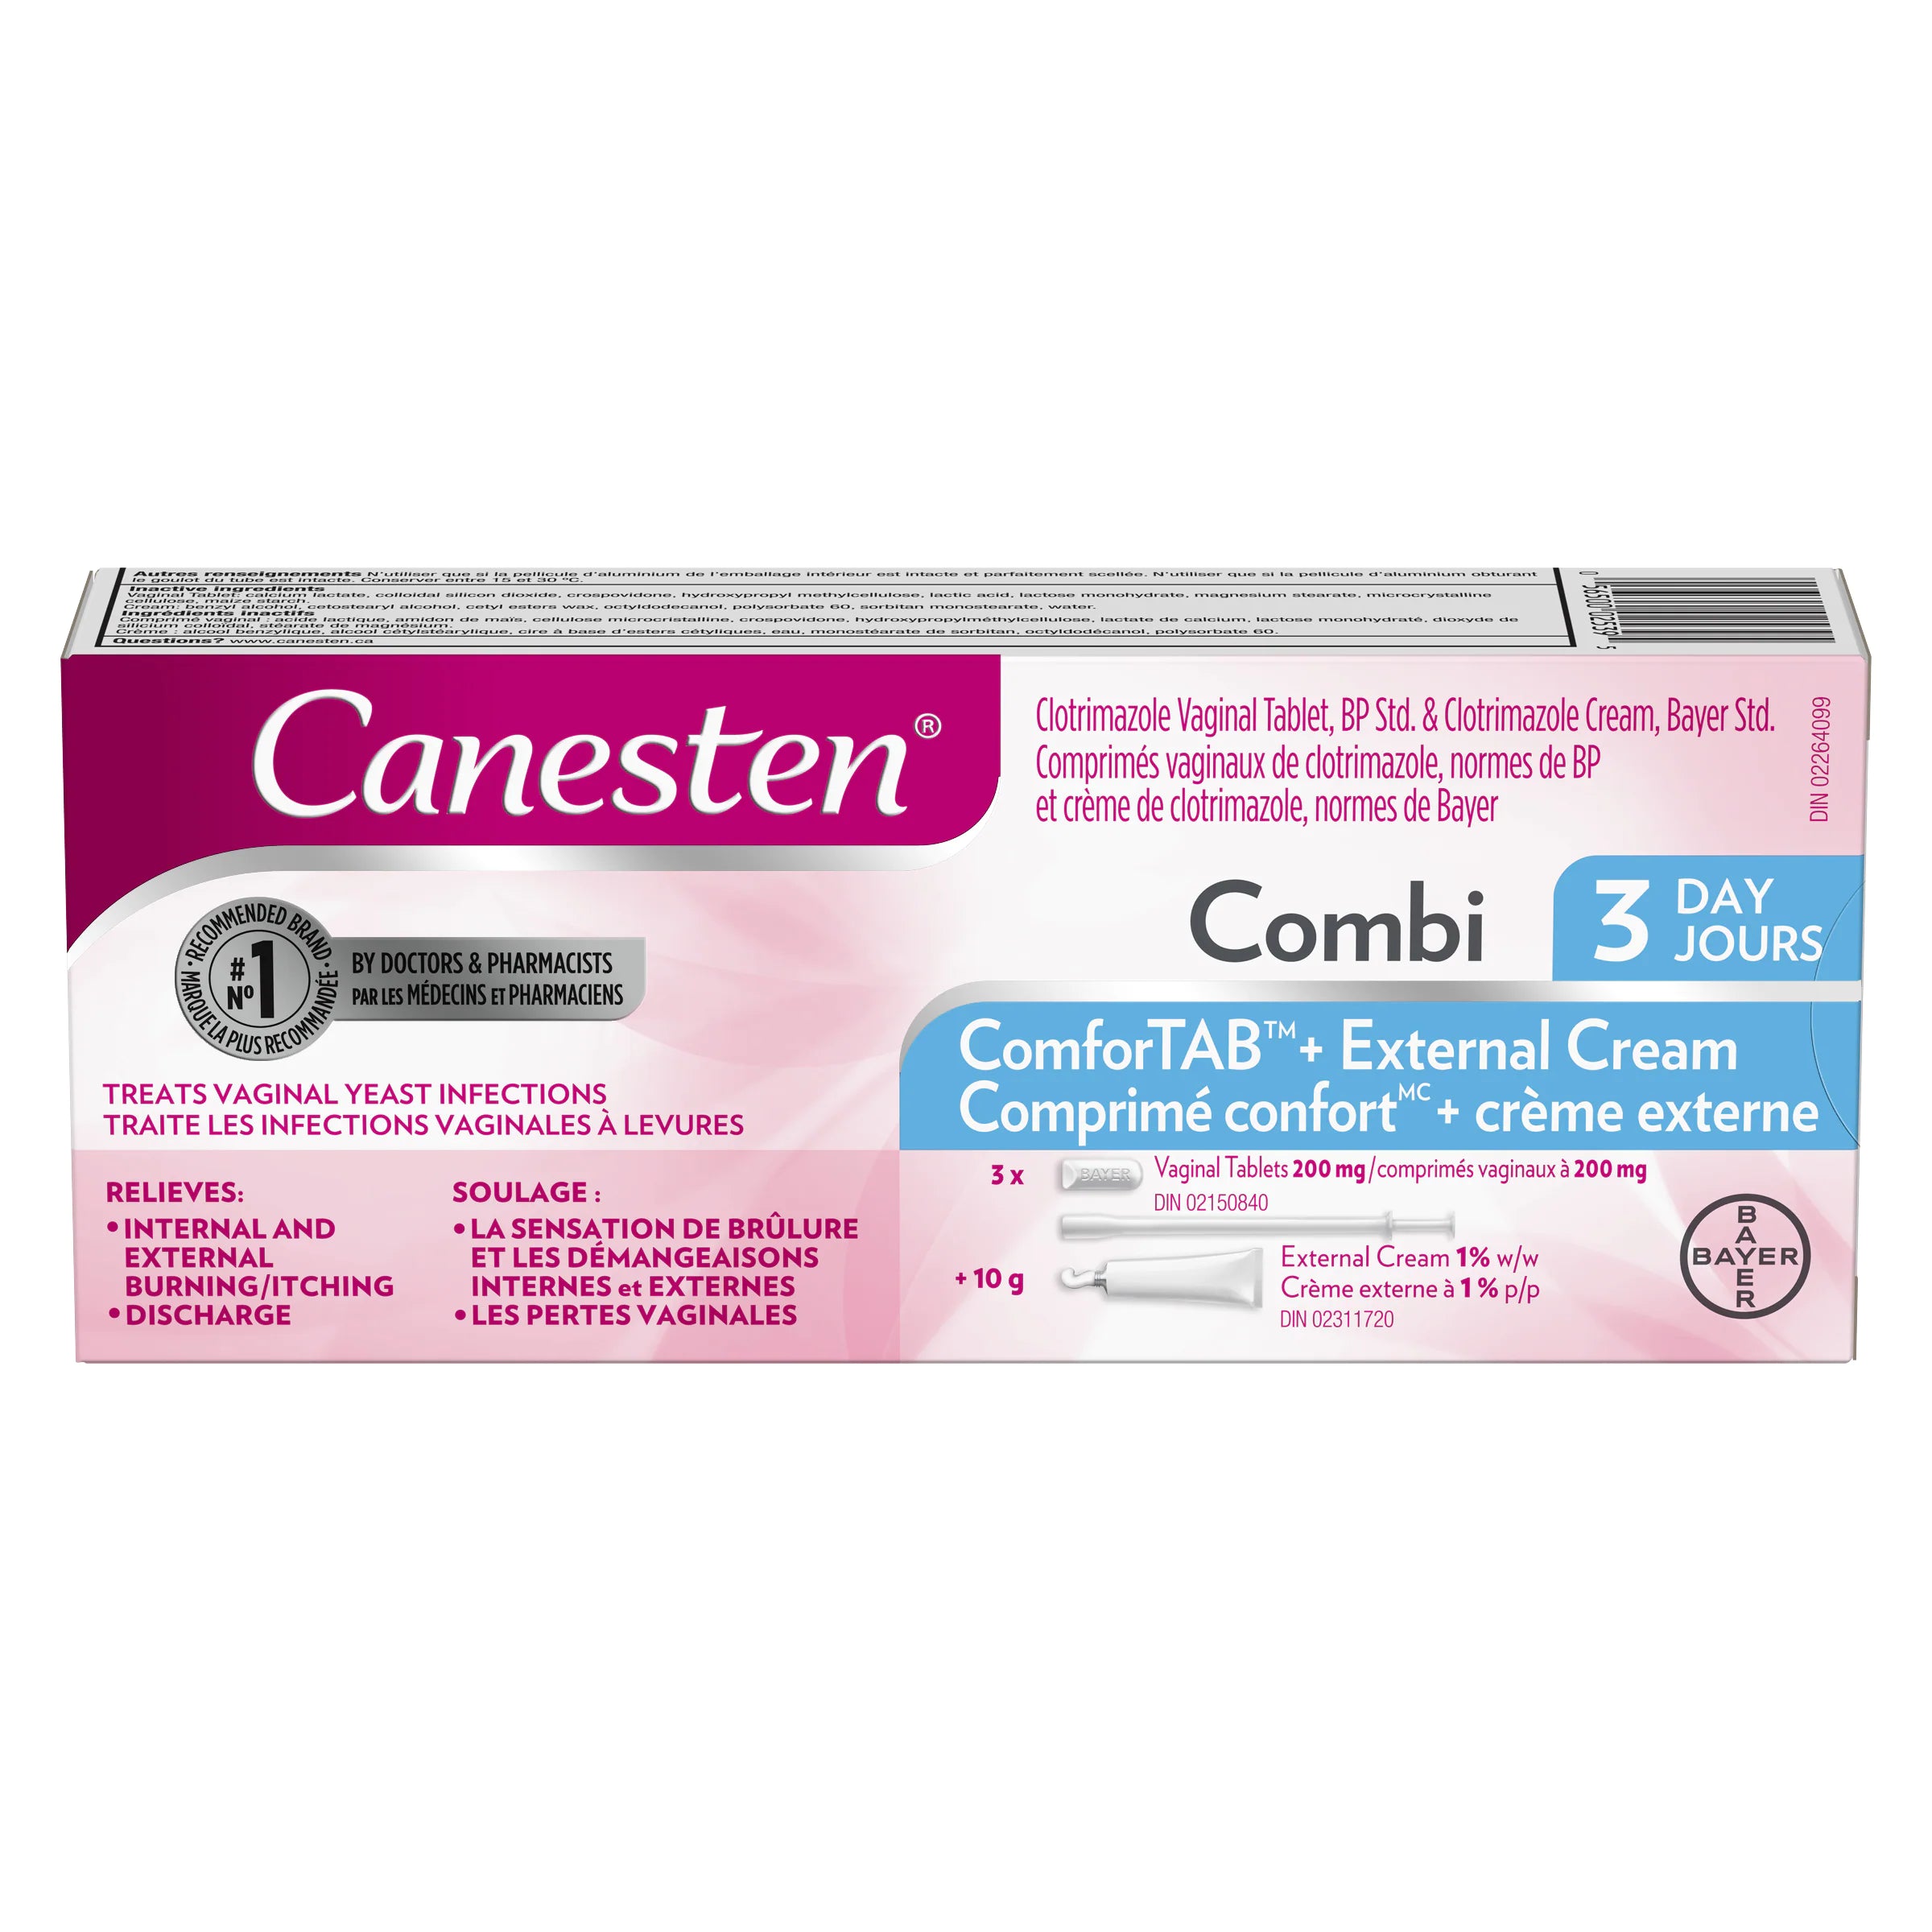 Canesten Combi 3 Day ComforTAB Yeast Infection treatment